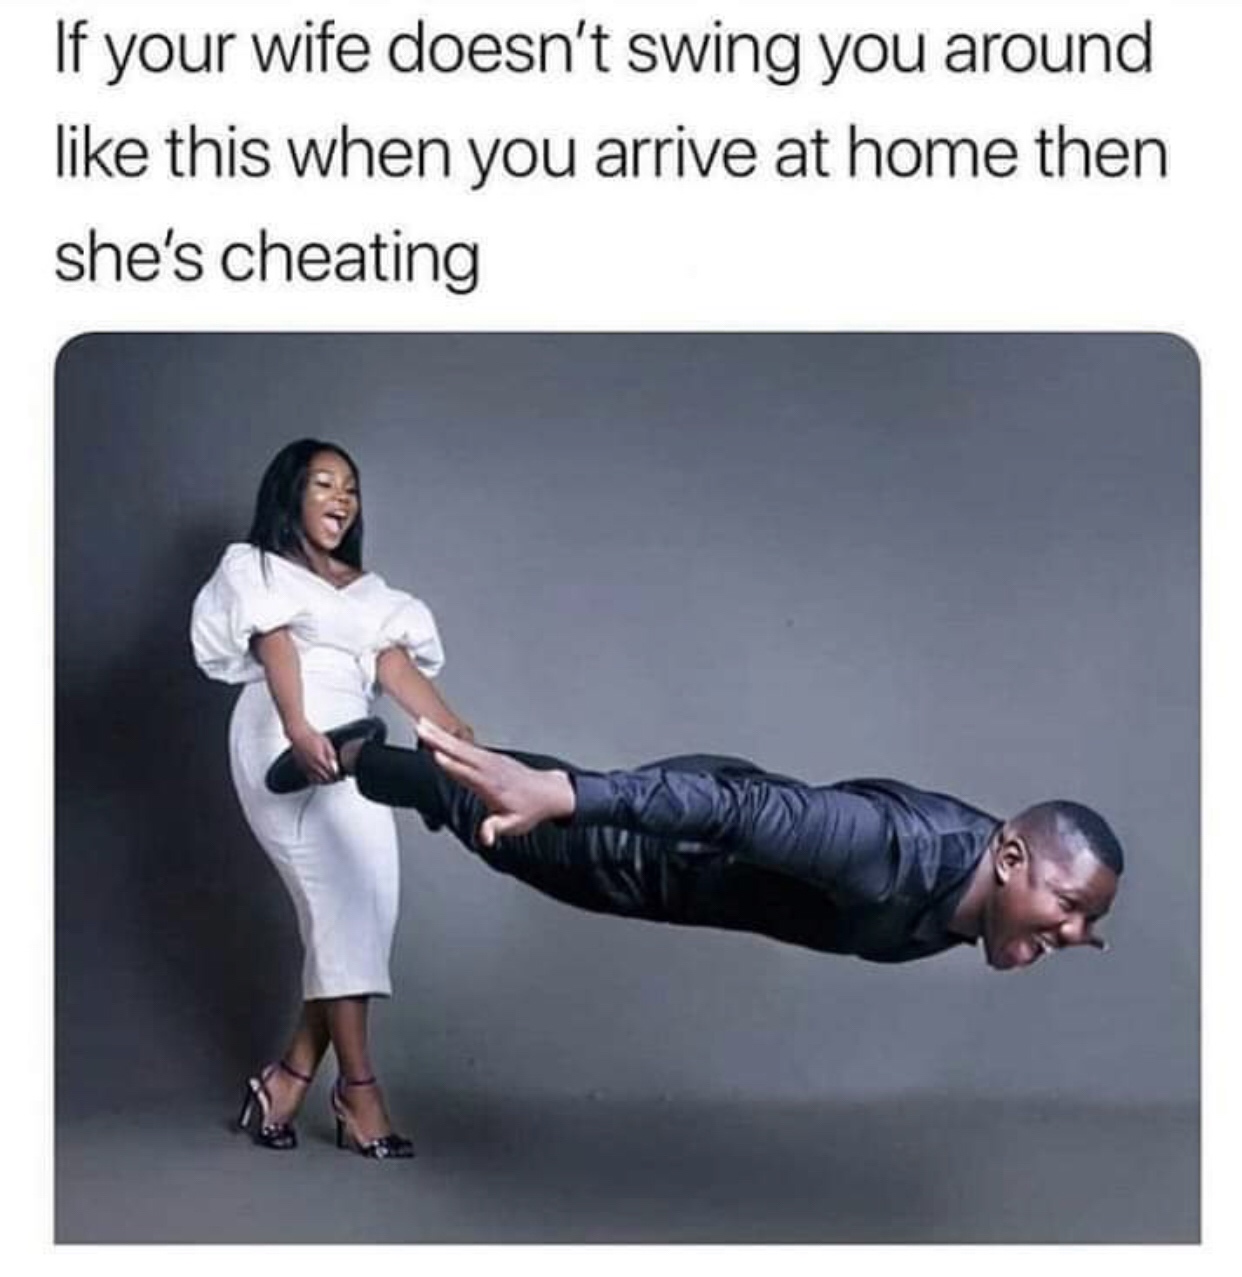 wife swinging husband - If your wife doesn't swing you around this when you arrive at home then she's cheating